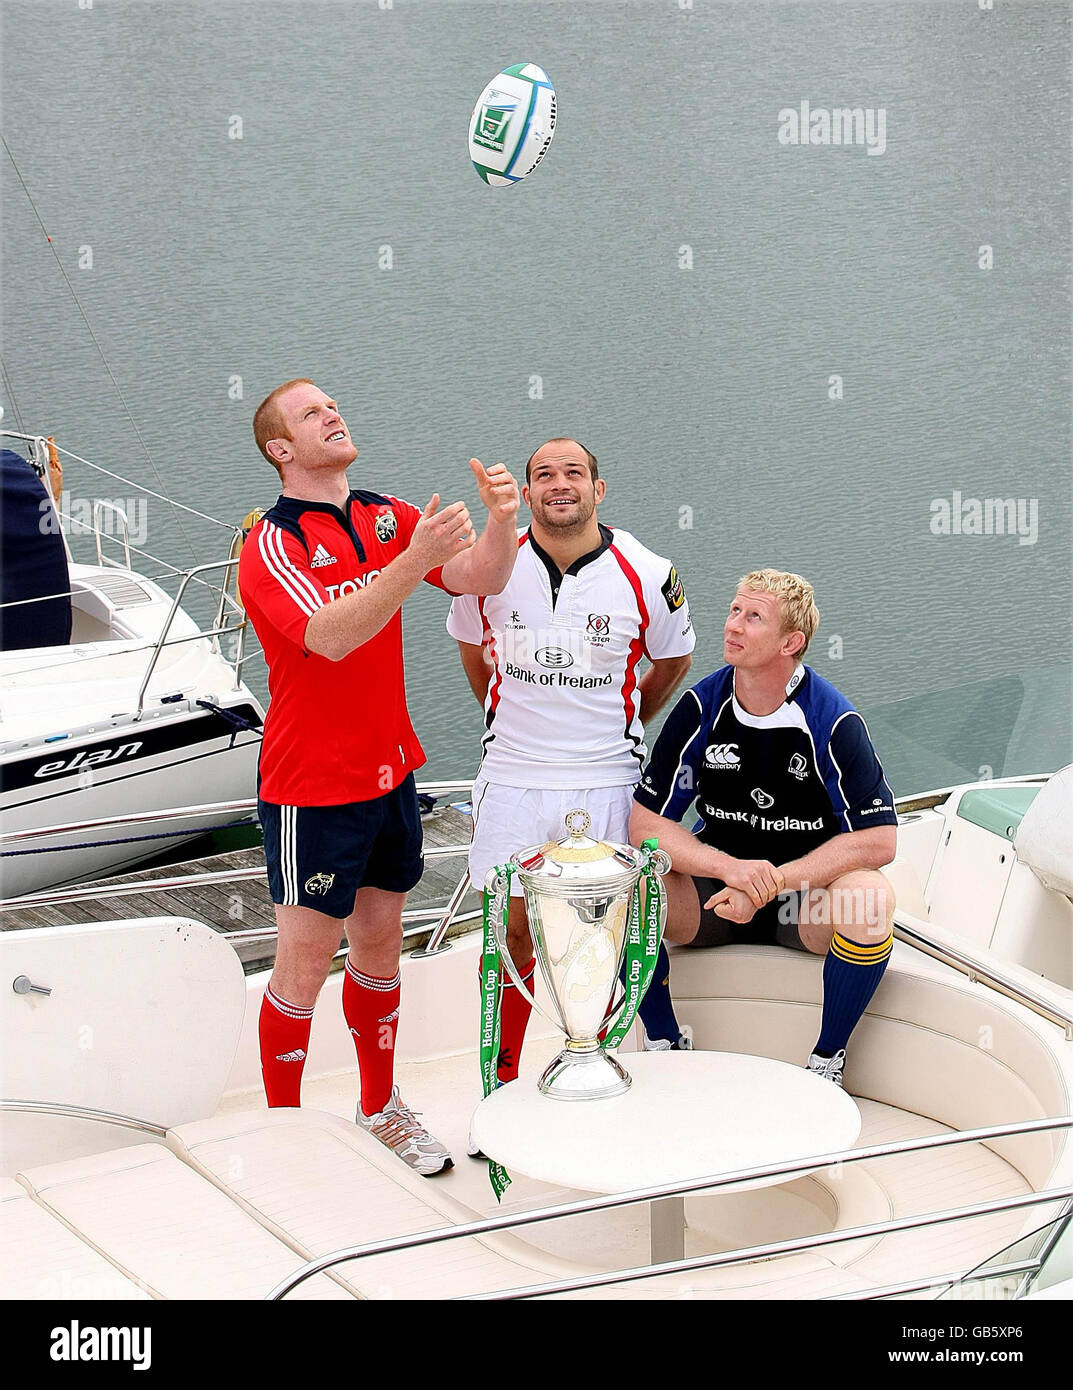 Munster's Paul O'Connell (left) with Ulster's Rory Best and Leinster's Leo Cullen (right) with the Heineken Cup during the Heineken Cup Launch at the marina near Cruzzo Restaurant in Malahide, Dublin, Ireland. Stock Photo